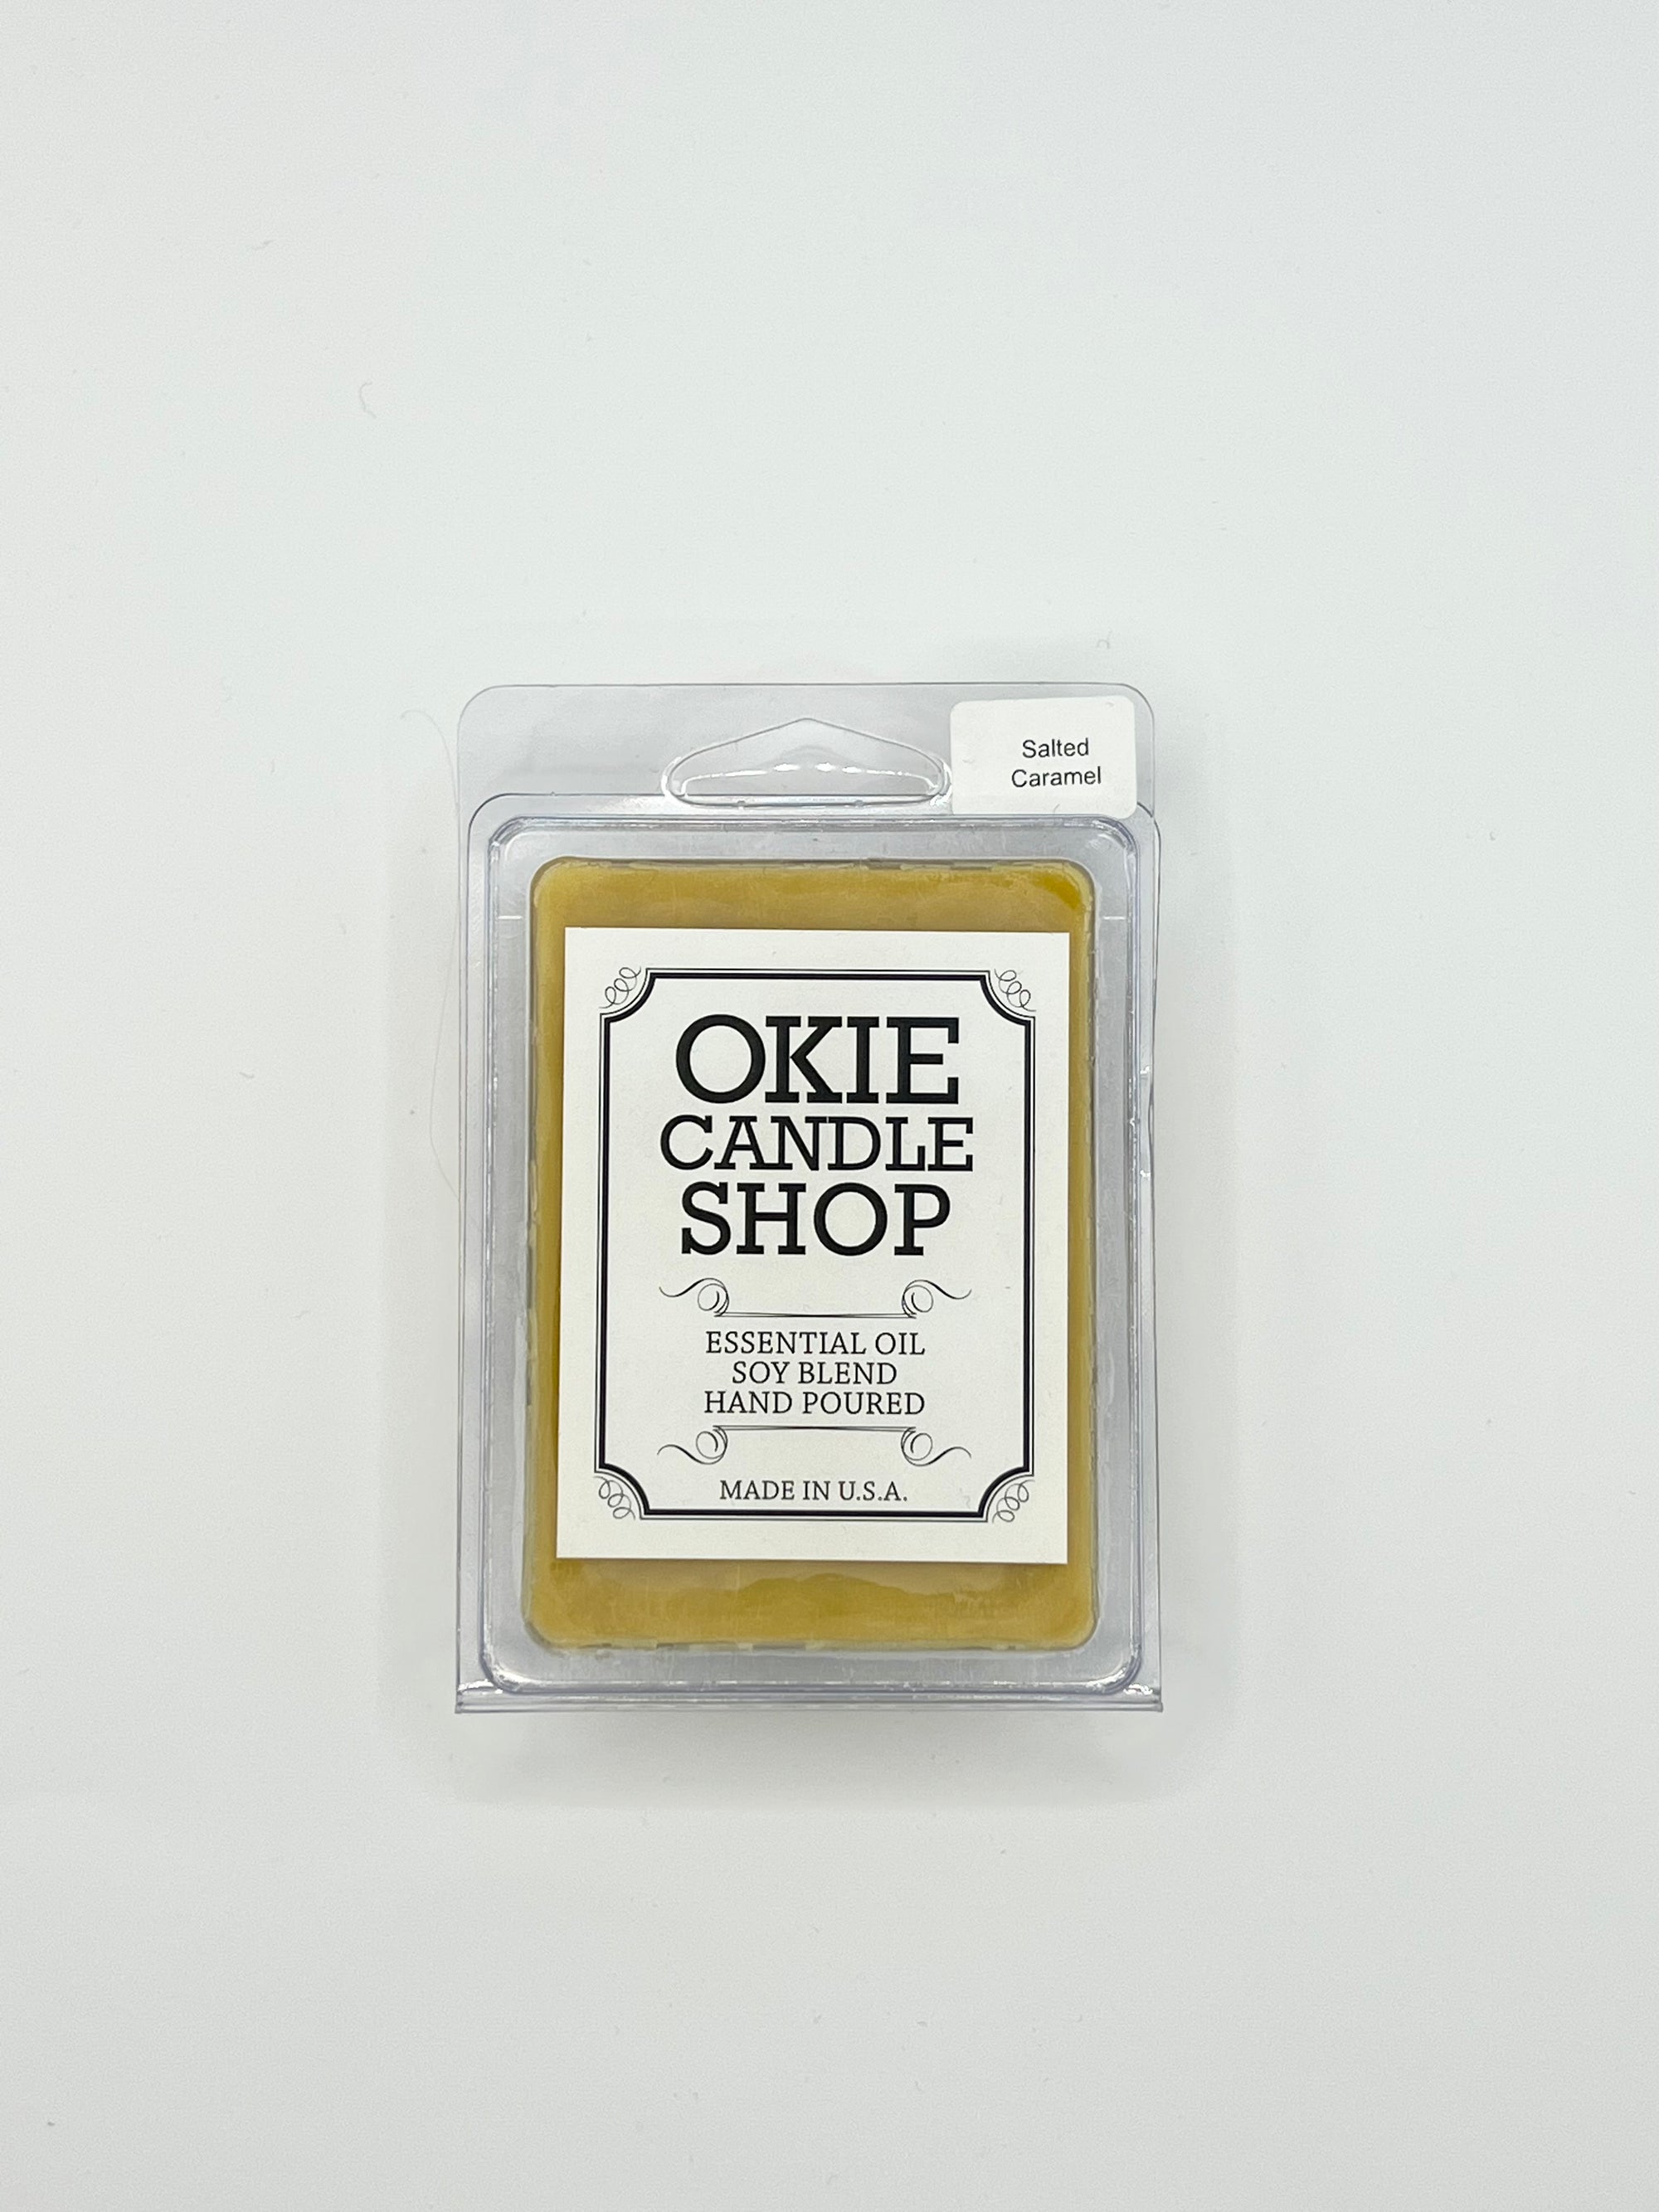 Okie Candle Salted Caramel - Wax Melts